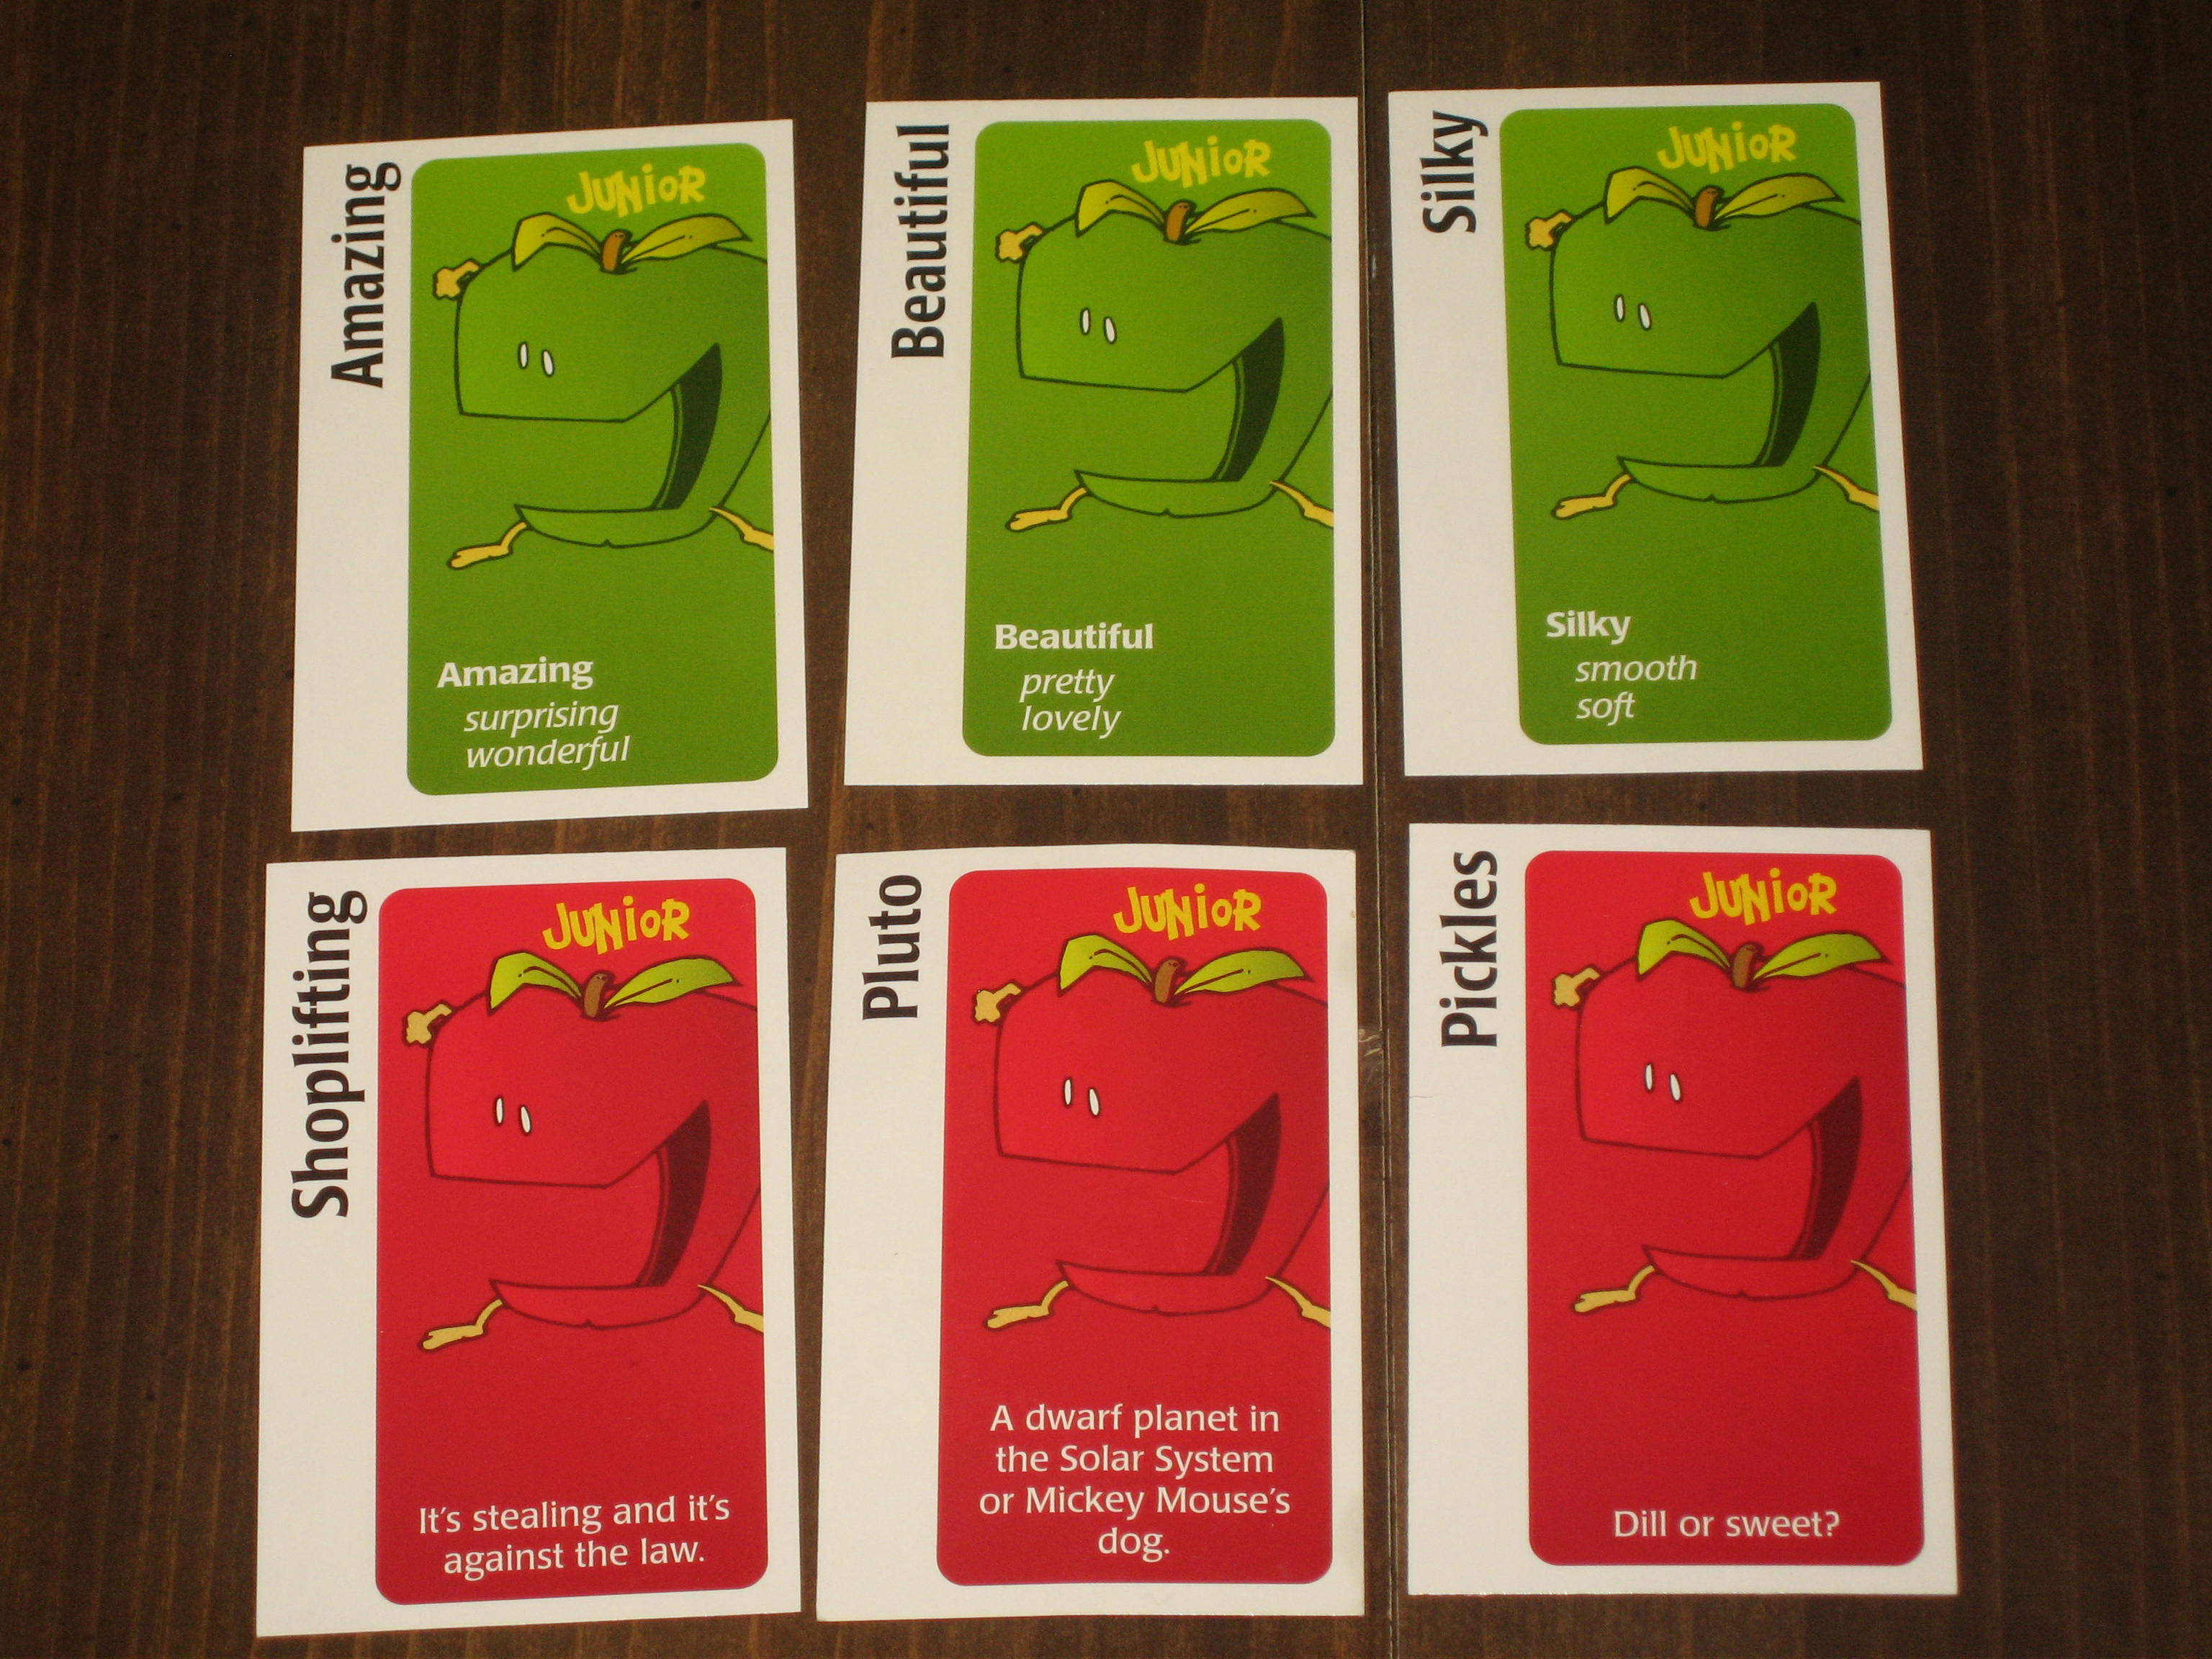 50-apples-to-apples-junior-green-playing-cards-games-game-pieces-parts